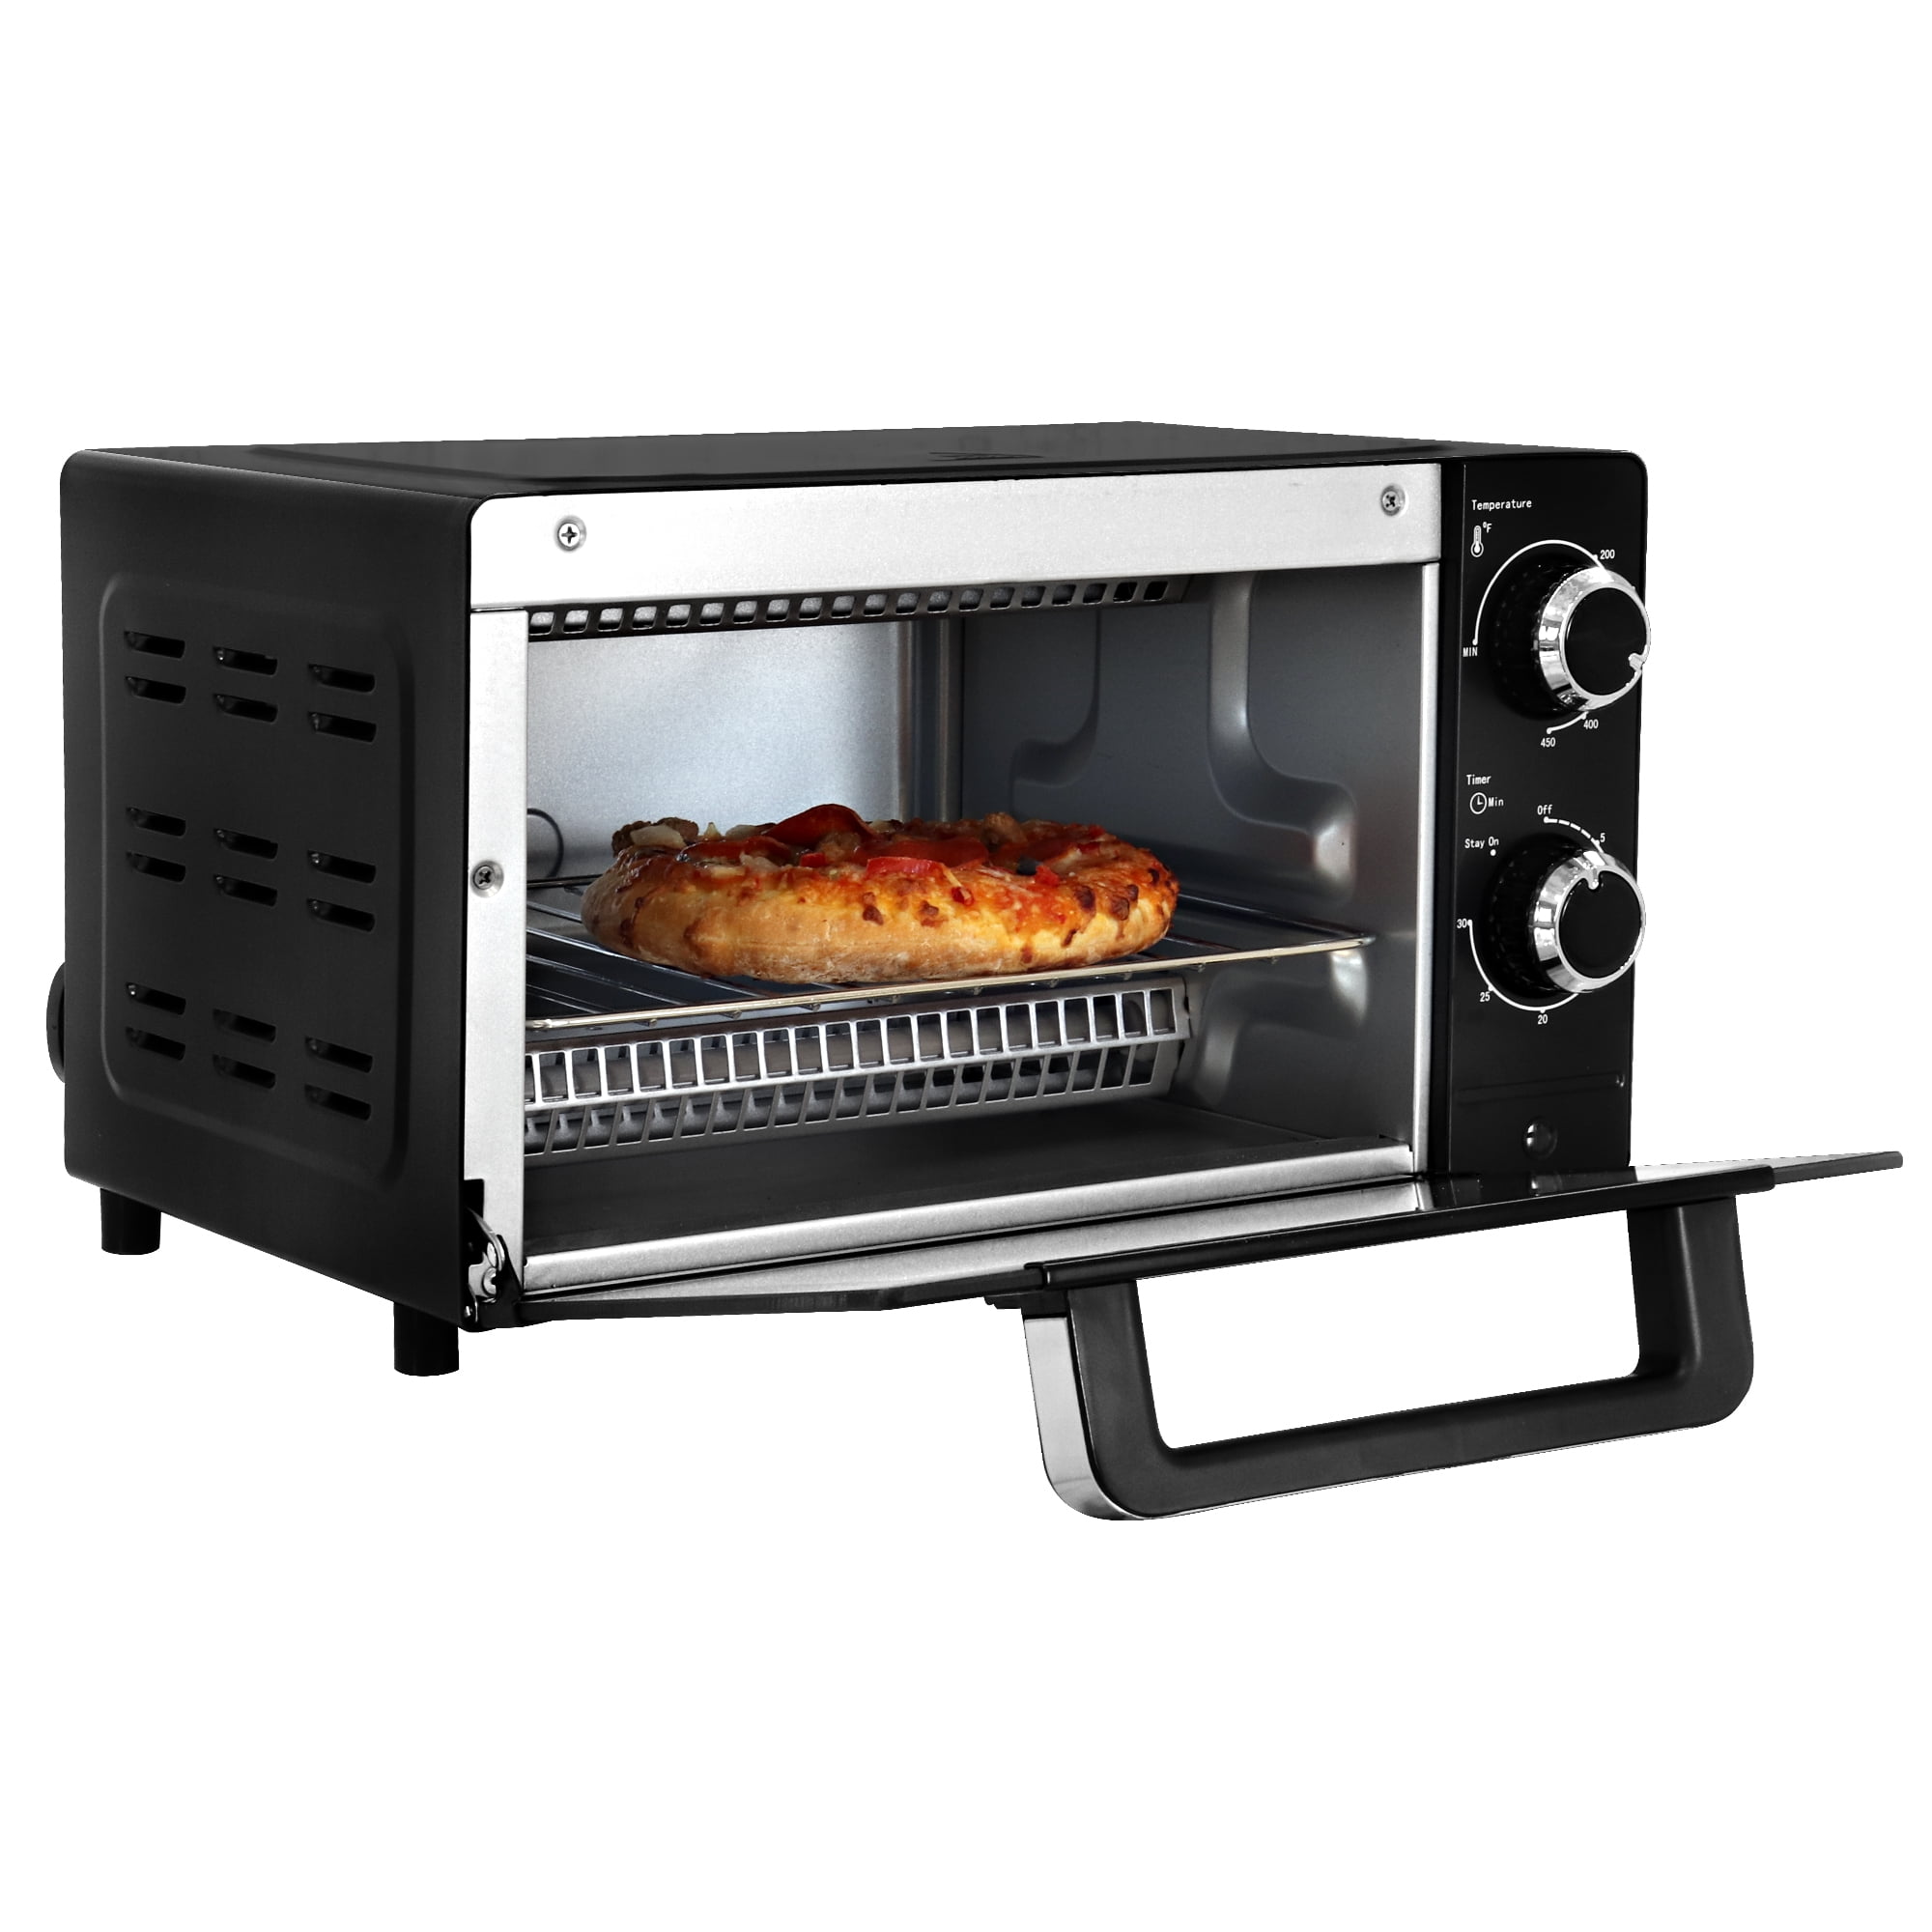 SUNWEIHAOA Toaster Ovens,Countertop Multi-Function Stainless Steel Toaster  Oven with Convection Toaster Oven Includes Baking Pan and Broil Rack